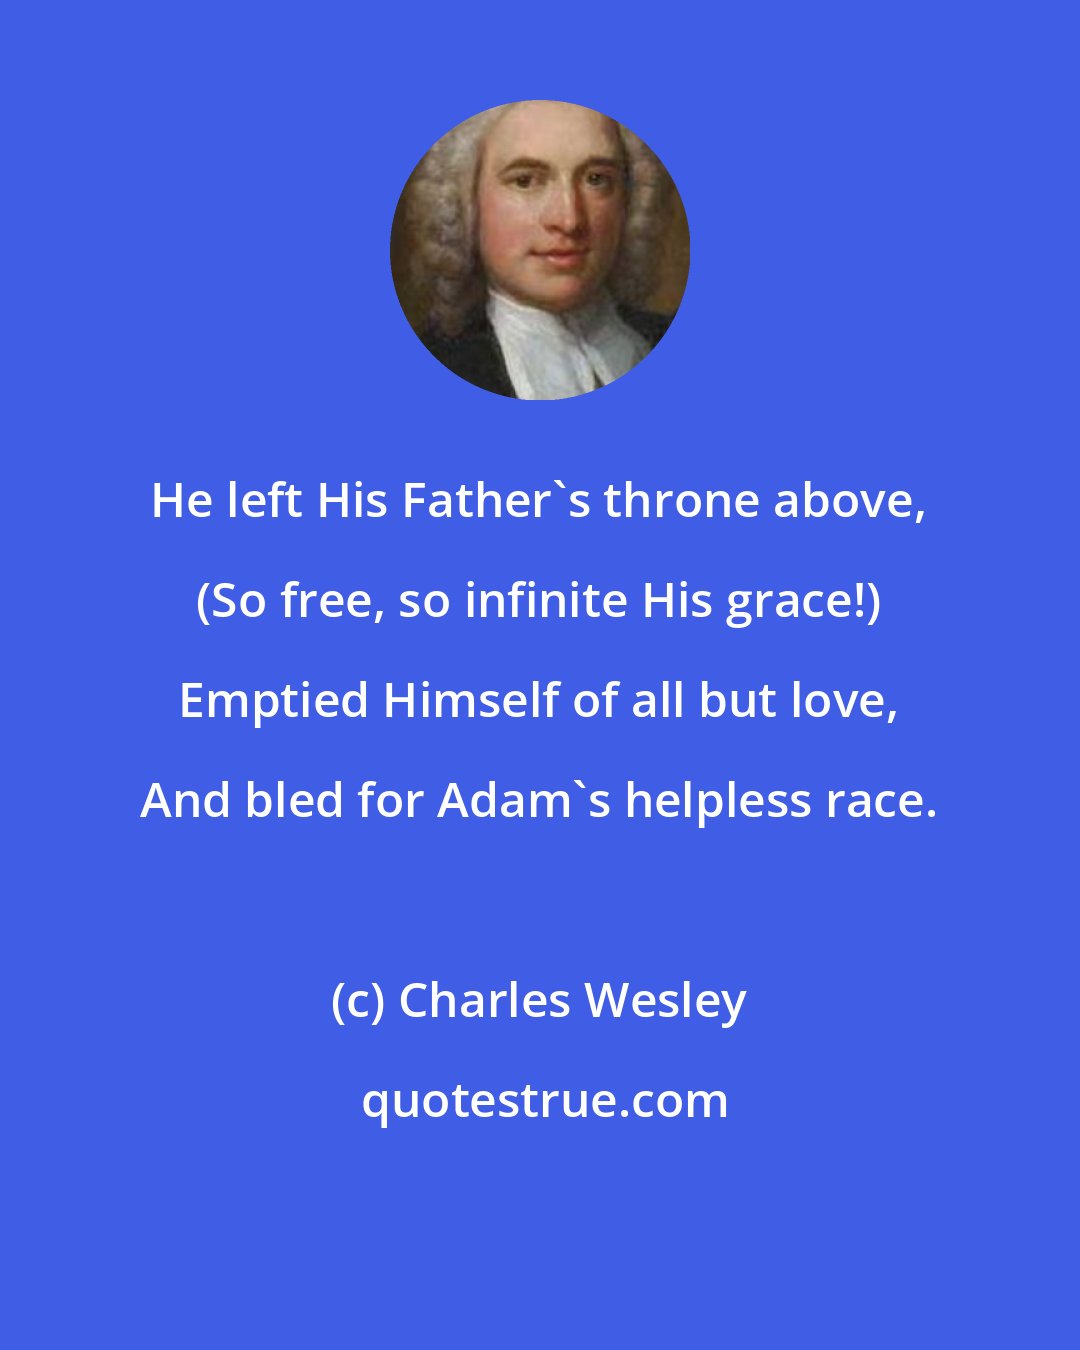 Charles Wesley: He left His Father's throne above, (So free, so infinite His grace!) Emptied Himself of all but love, And bled for Adam's helpless race.